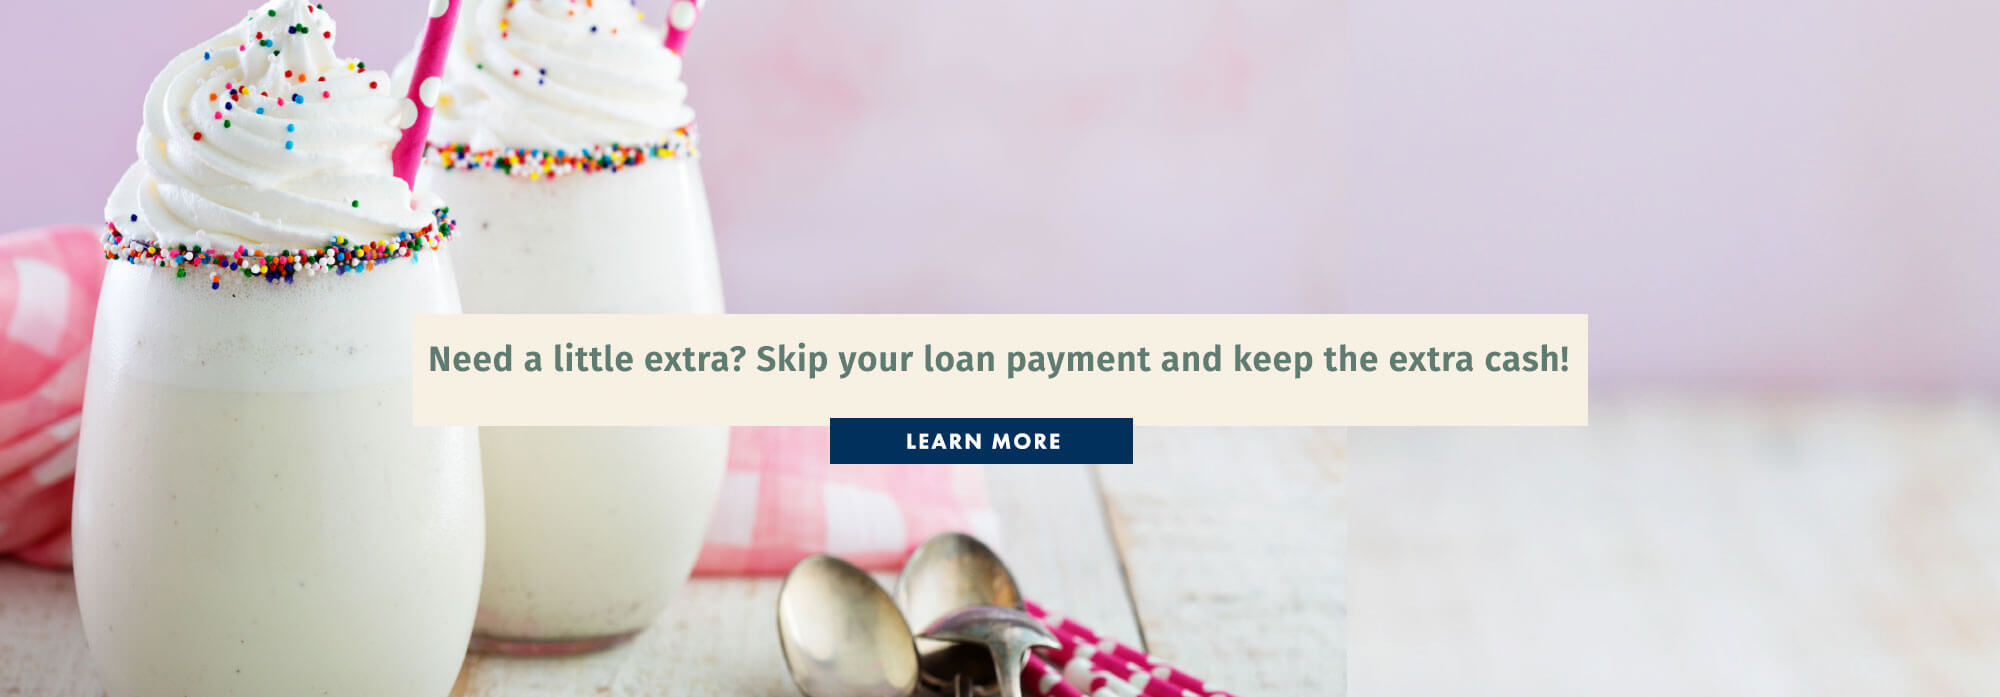 Need a little extra? Skip your loan payment and keep the extra cash! Learn more